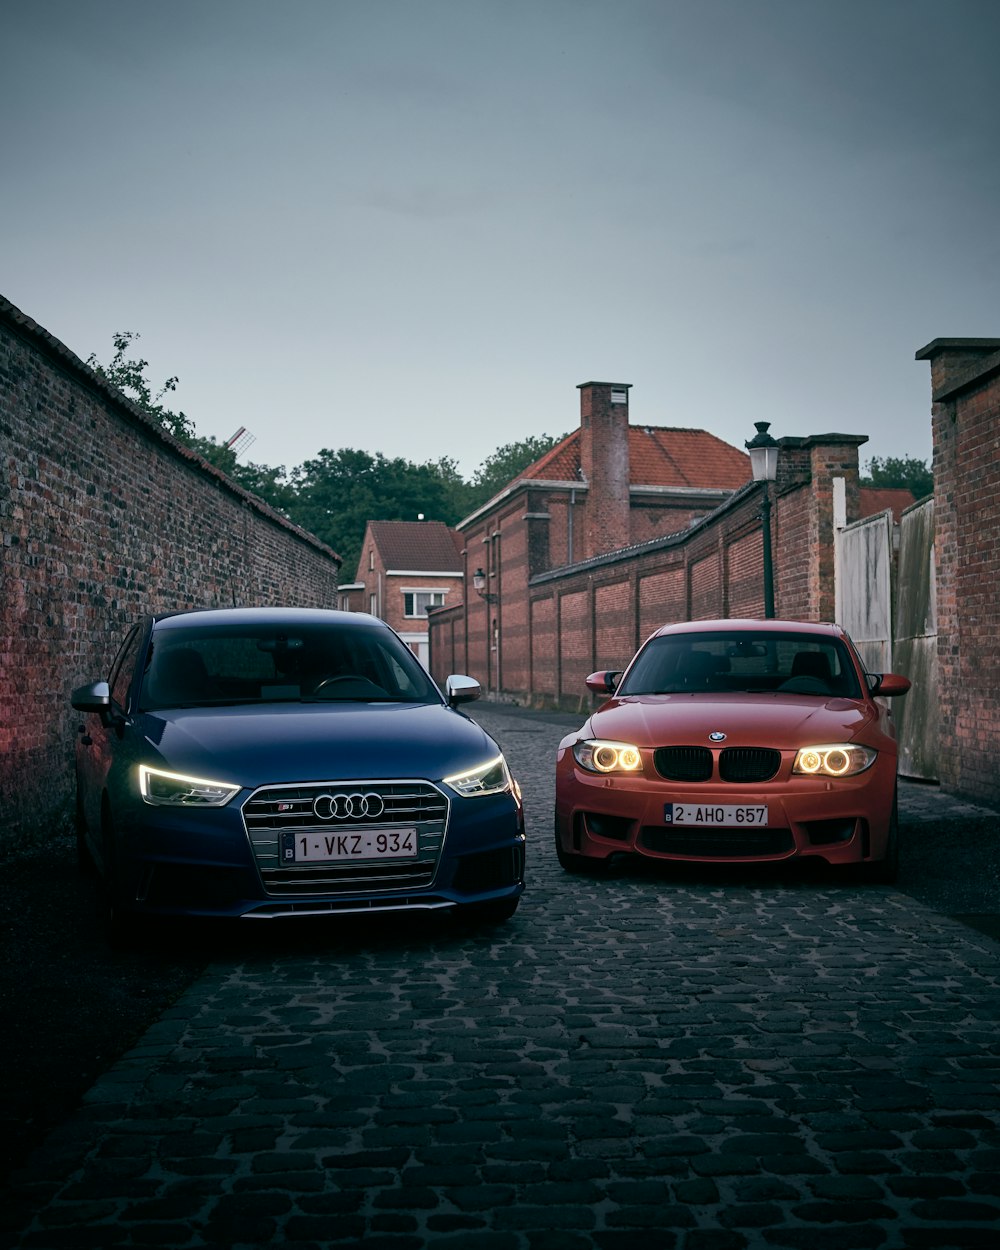 two cars parked next to each other on a cobblestone road